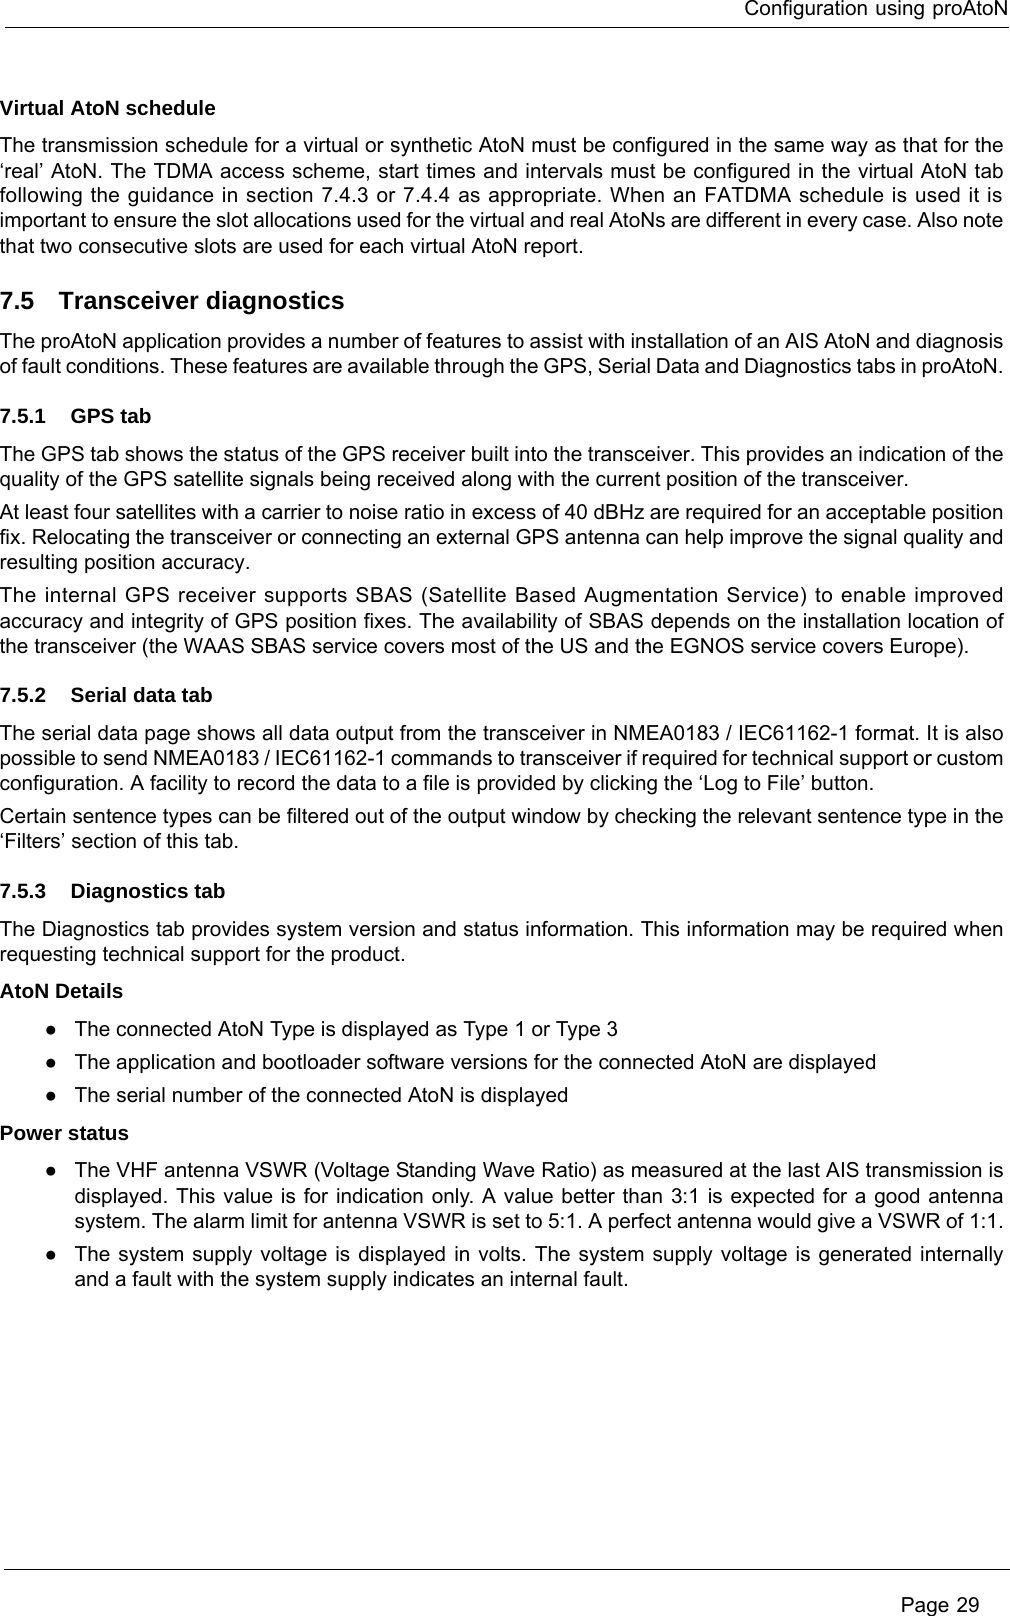 Configuration using proAtoN Page 29Virtual AtoN scheduleThe transmission schedule for a virtual or synthetic AtoN must be configured in the same way as that for the ‘real’ AtoN. The TDMA access scheme, start times and intervals must be configured in the virtual AtoN tab following the guidance in section 7.4.3 or 7.4.4 as appropriate. When an FATDMA schedule is used it is important to ensure the slot allocations used for the virtual and real AtoNs are different in every case. Also note that two consecutive slots are used for each virtual AtoN report.7.5 Transceiver diagnosticsThe proAtoN application provides a number of features to assist with installation of an AIS AtoN and diagnosis of fault conditions. These features are available through the GPS, Serial Data and Diagnostics tabs in proAtoN.7.5.1 GPS tabThe GPS tab shows the status of the GPS receiver built into the transceiver. This provides an indication of the quality of the GPS satellite signals being received along with the current position of the transceiver.At least four satellites with a carrier to noise ratio in excess of 40 dBHz are required for an acceptable position fix. Relocating the transceiver or connecting an external GPS antenna can help improve the signal quality and resulting position accuracy. The internal GPS receiver supports SBAS (Satellite Based Augmentation Service) to enable improved accuracy and integrity of GPS position fixes. The availability of SBAS depends on the installation location of the transceiver (the WAAS SBAS service covers most of the US and the EGNOS service covers Europe).7.5.2 Serial data tabThe serial data page shows all data output from the transceiver in NMEA0183 / IEC61162-1 format. It is also possible to send NMEA0183 / IEC61162-1 commands to transceiver if required for technical support or custom configuration. A facility to record the data to a file is provided by clicking the ‘Log to File’ button.Certain sentence types can be filtered out of the output window by checking the relevant sentence type in the ‘Filters’ section of this tab.7.5.3 Diagnostics tabThe Diagnostics tab provides system version and status information. This information may be required when requesting technical support for the product. AtoN Details●The connected AtoN Type is displayed as Type 1 or Type 3●The application and bootloader software versions for the connected AtoN are displayed●The serial number of the connected AtoN is displayedPower status●The VHF antenna VSWR (Voltage Standing Wave Ratio) as measured at the last AIS transmission is displayed. This value is for indication only. A value better than 3:1 is expected for a good antenna system. The alarm limit for antenna VSWR is set to 5:1. A perfect antenna would give a VSWR of 1:1.●The system supply voltage is displayed in volts. The system supply voltage is generated internally and a fault with the system supply indicates an internal fault. 